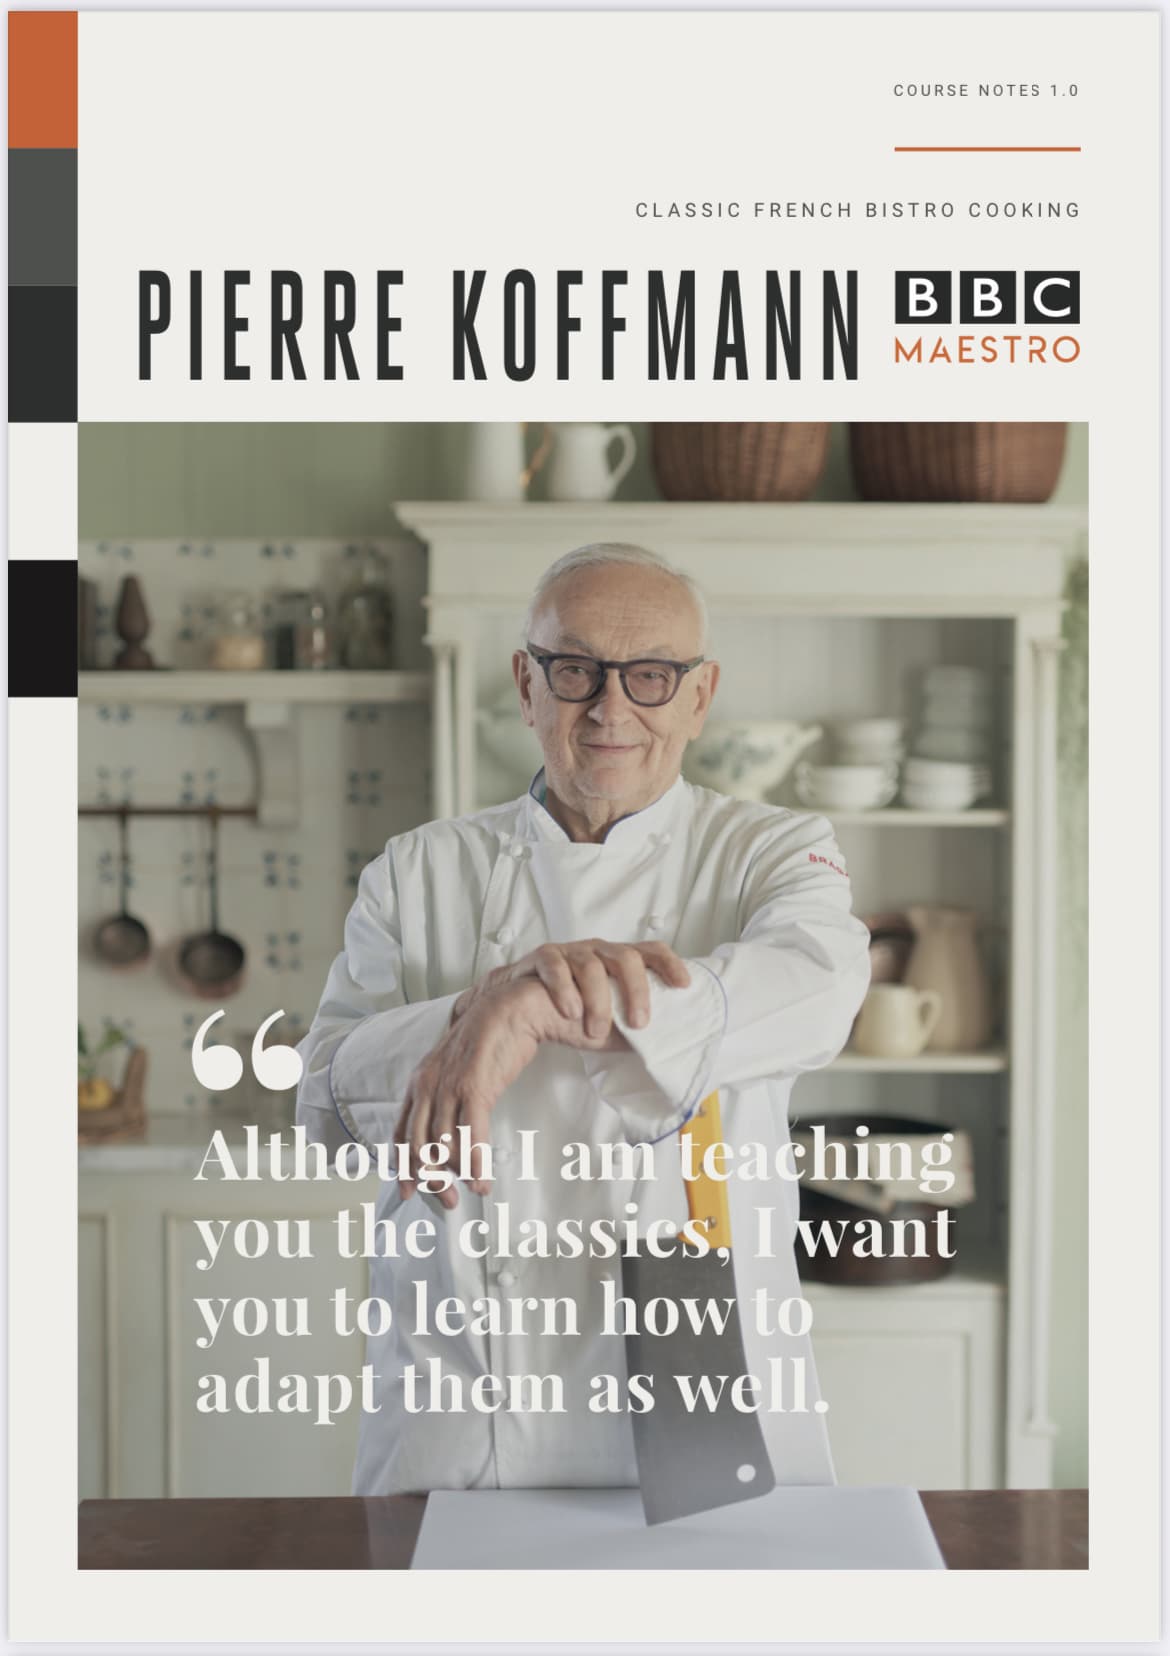 BBC Maestro course notes cover from Pierre Koffman's classic French bistro cooking course. Image shows elderly Pierre in chef's clothes leaning on a butcher's knife.